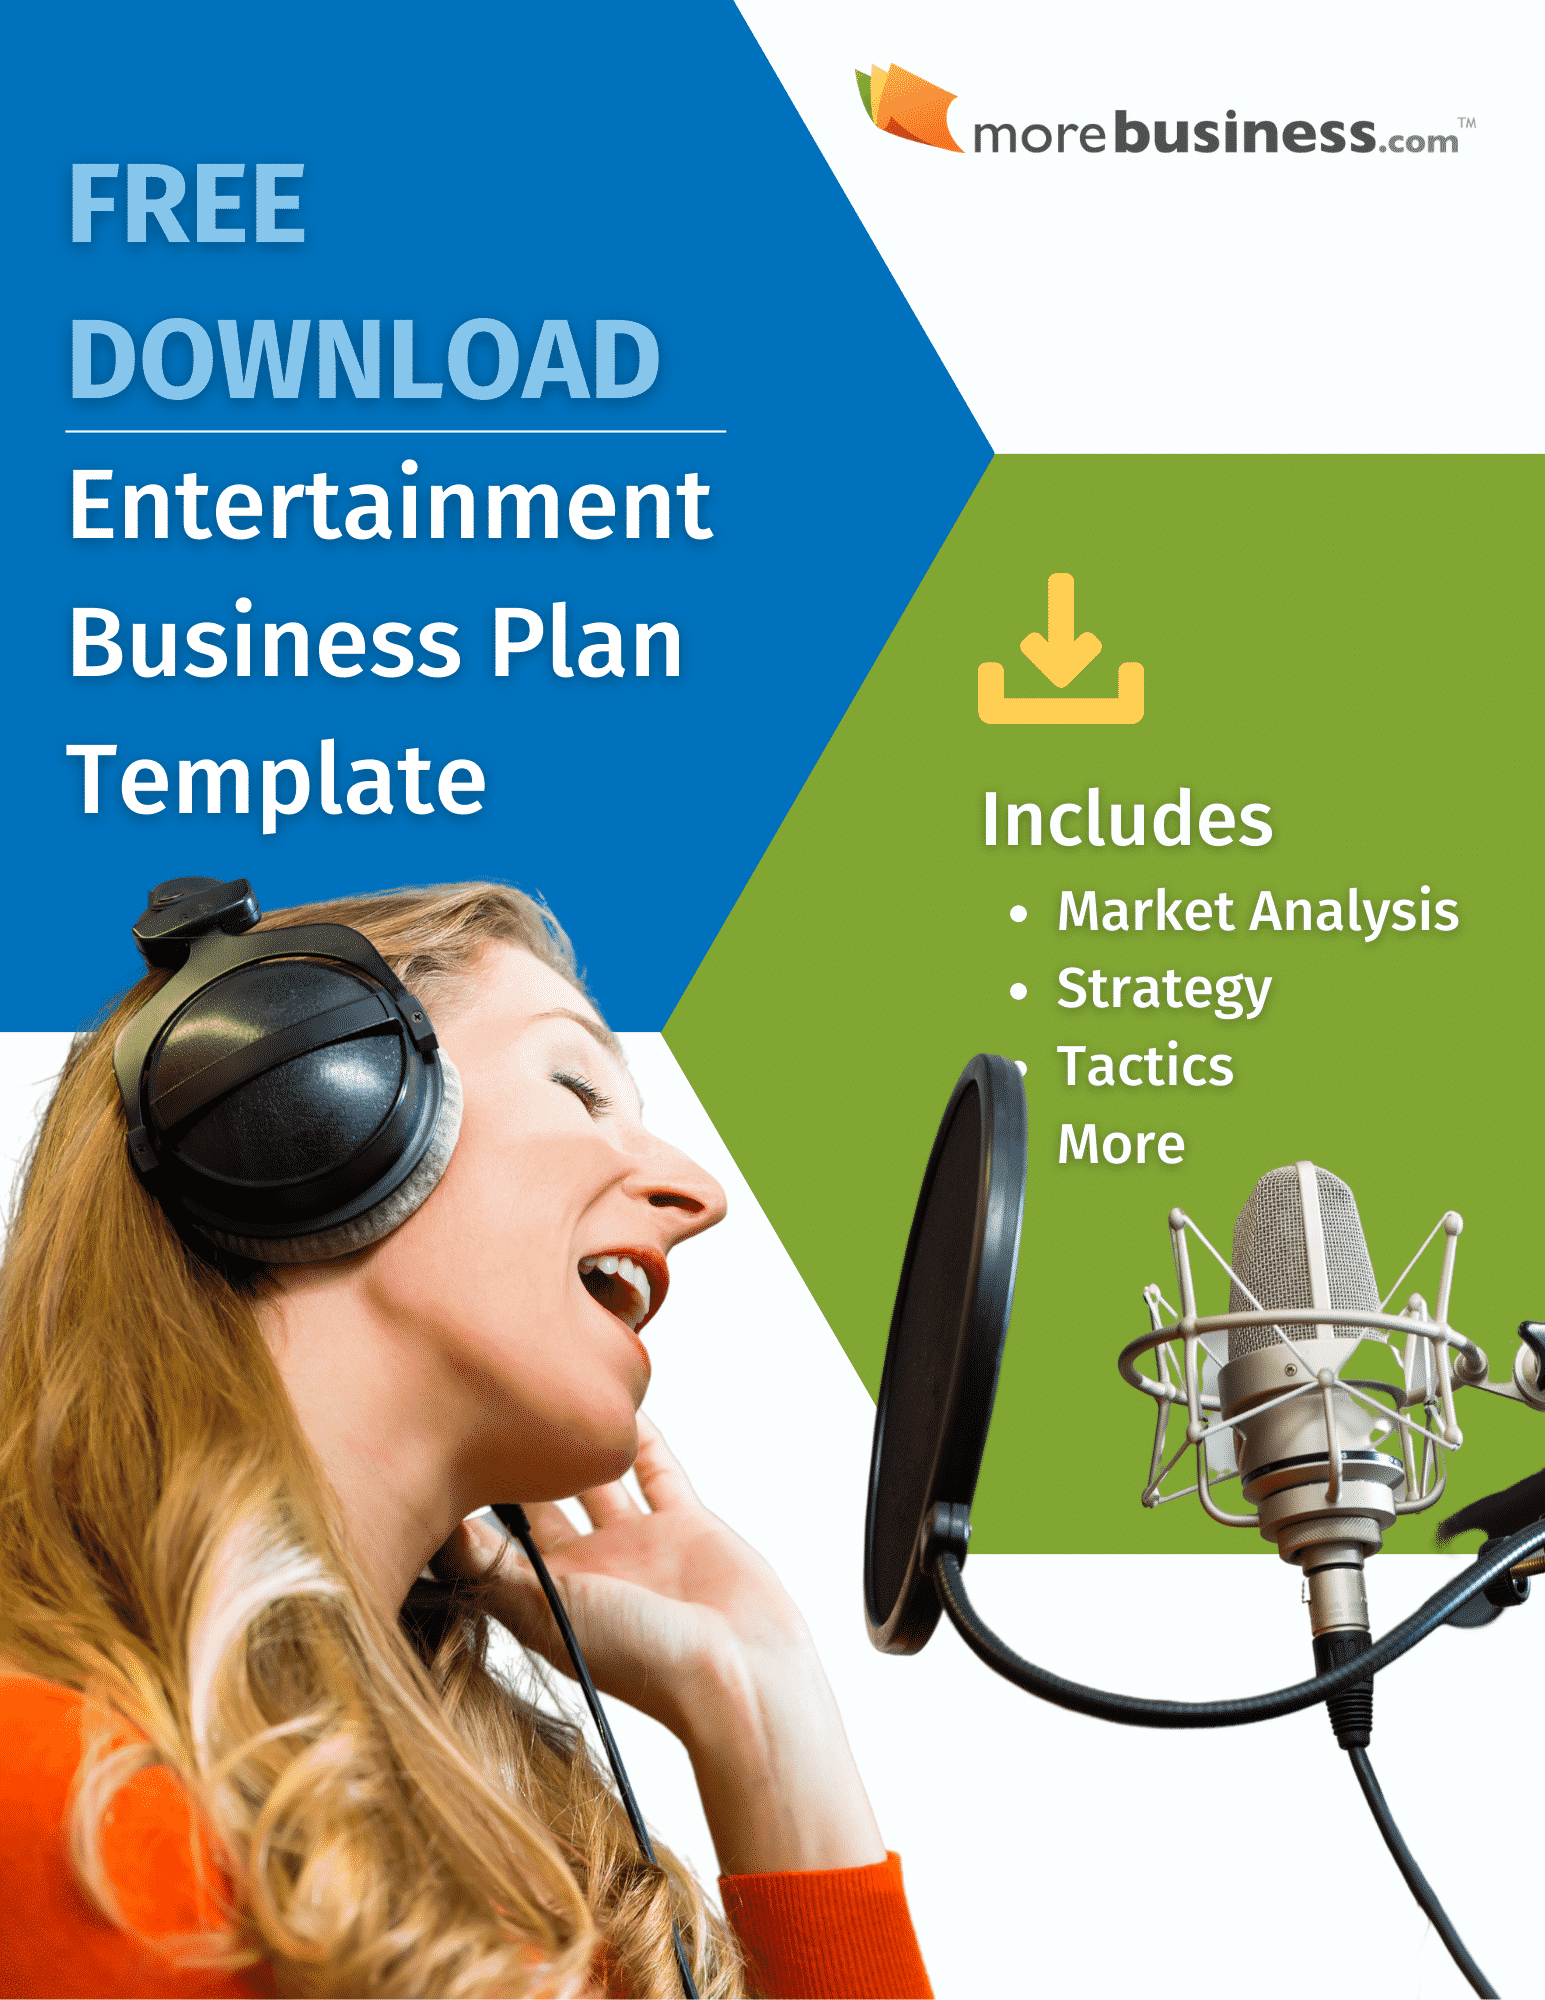 Entertainment Business Plan Example  MoreBusiness.com Within Free Dance Studio Business Plan Template